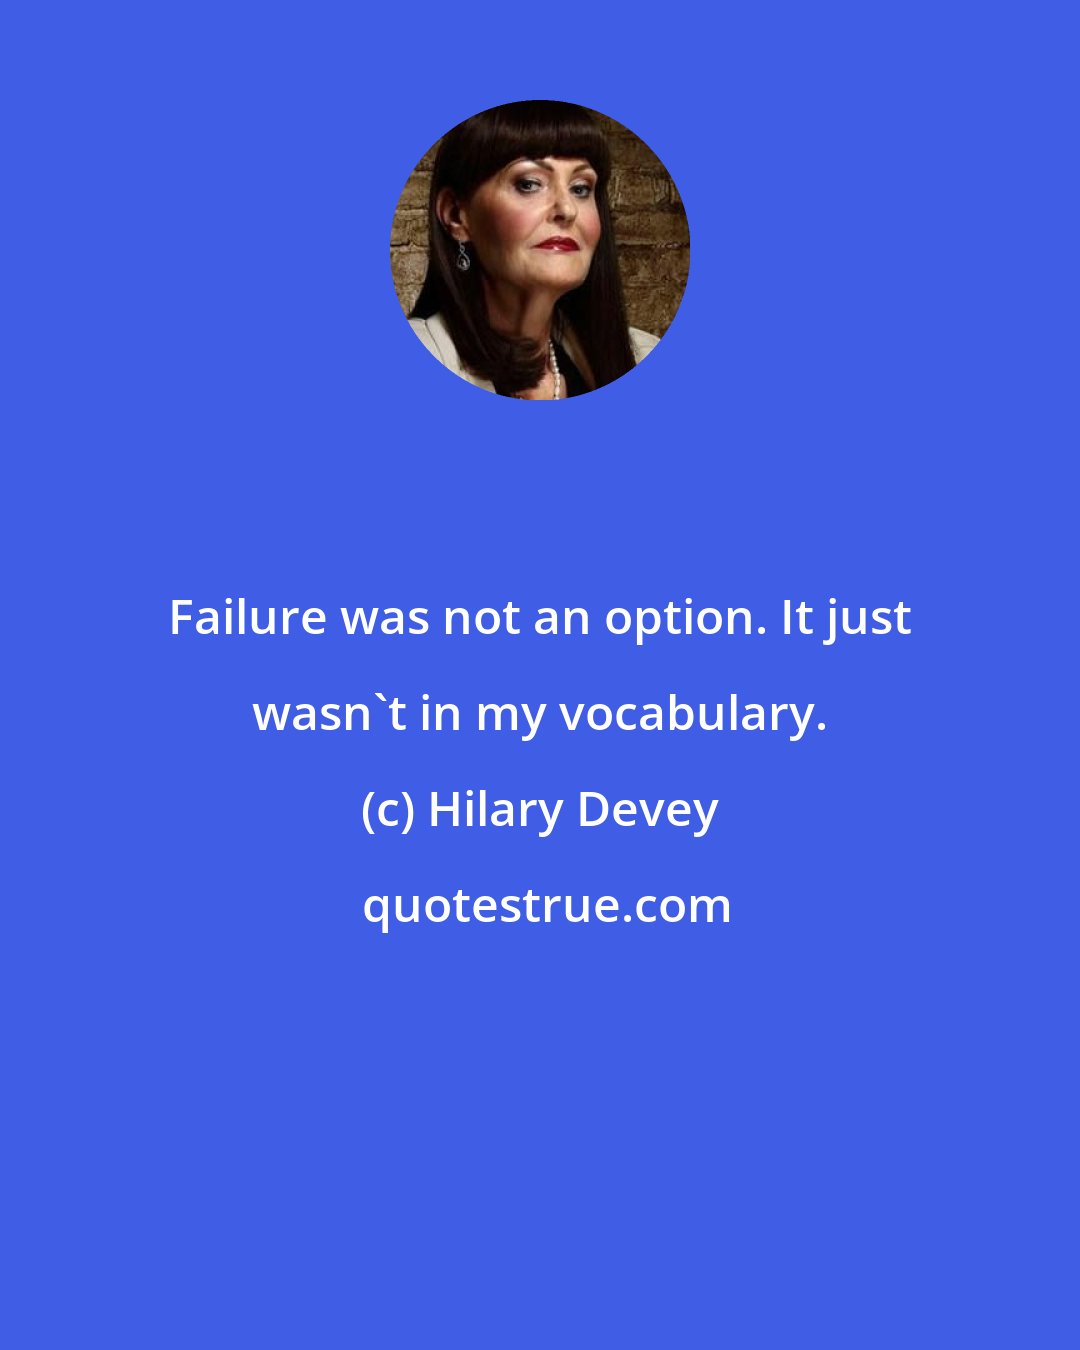 Hilary Devey: Failure was not an option. It just wasn't in my vocabulary.